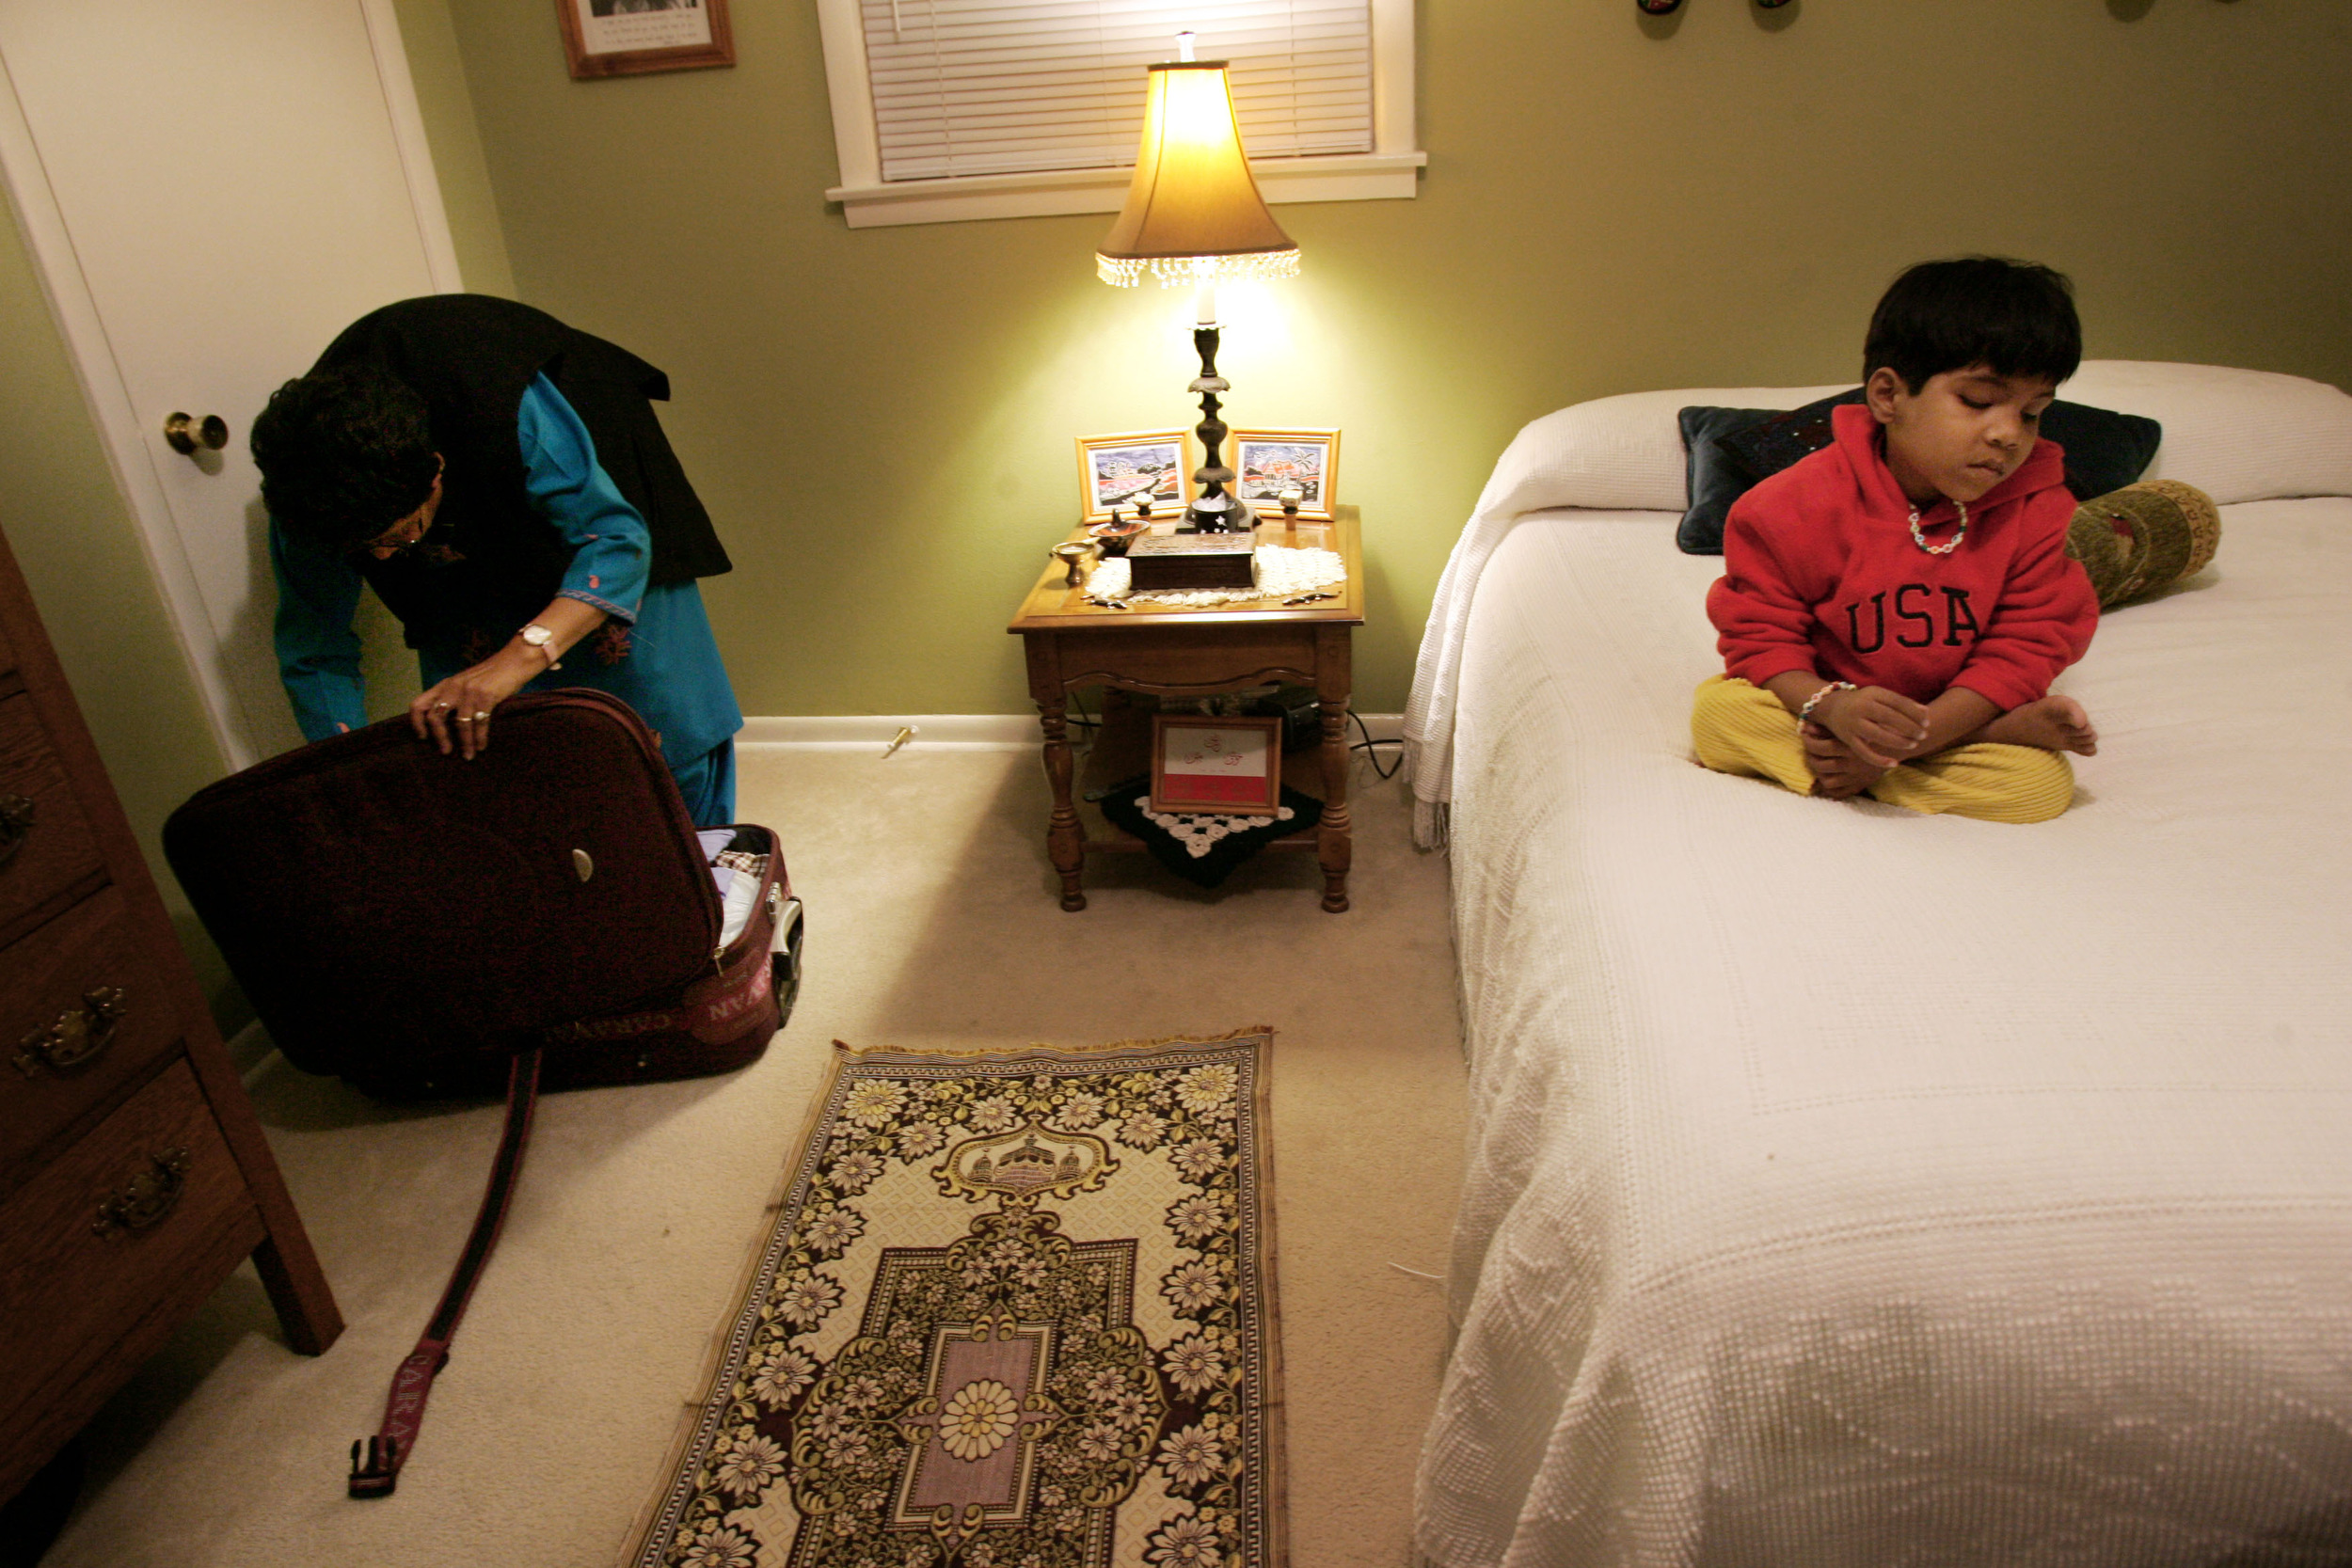  Kajal and Grace Zaidi settle in at a host home after arriving from India Wednesday, March 28, 2007 in Nashville, Tenn. Kajal often asked Grace if it was day or night during her first few days, as her internal clock adjusted without benefit of sight.